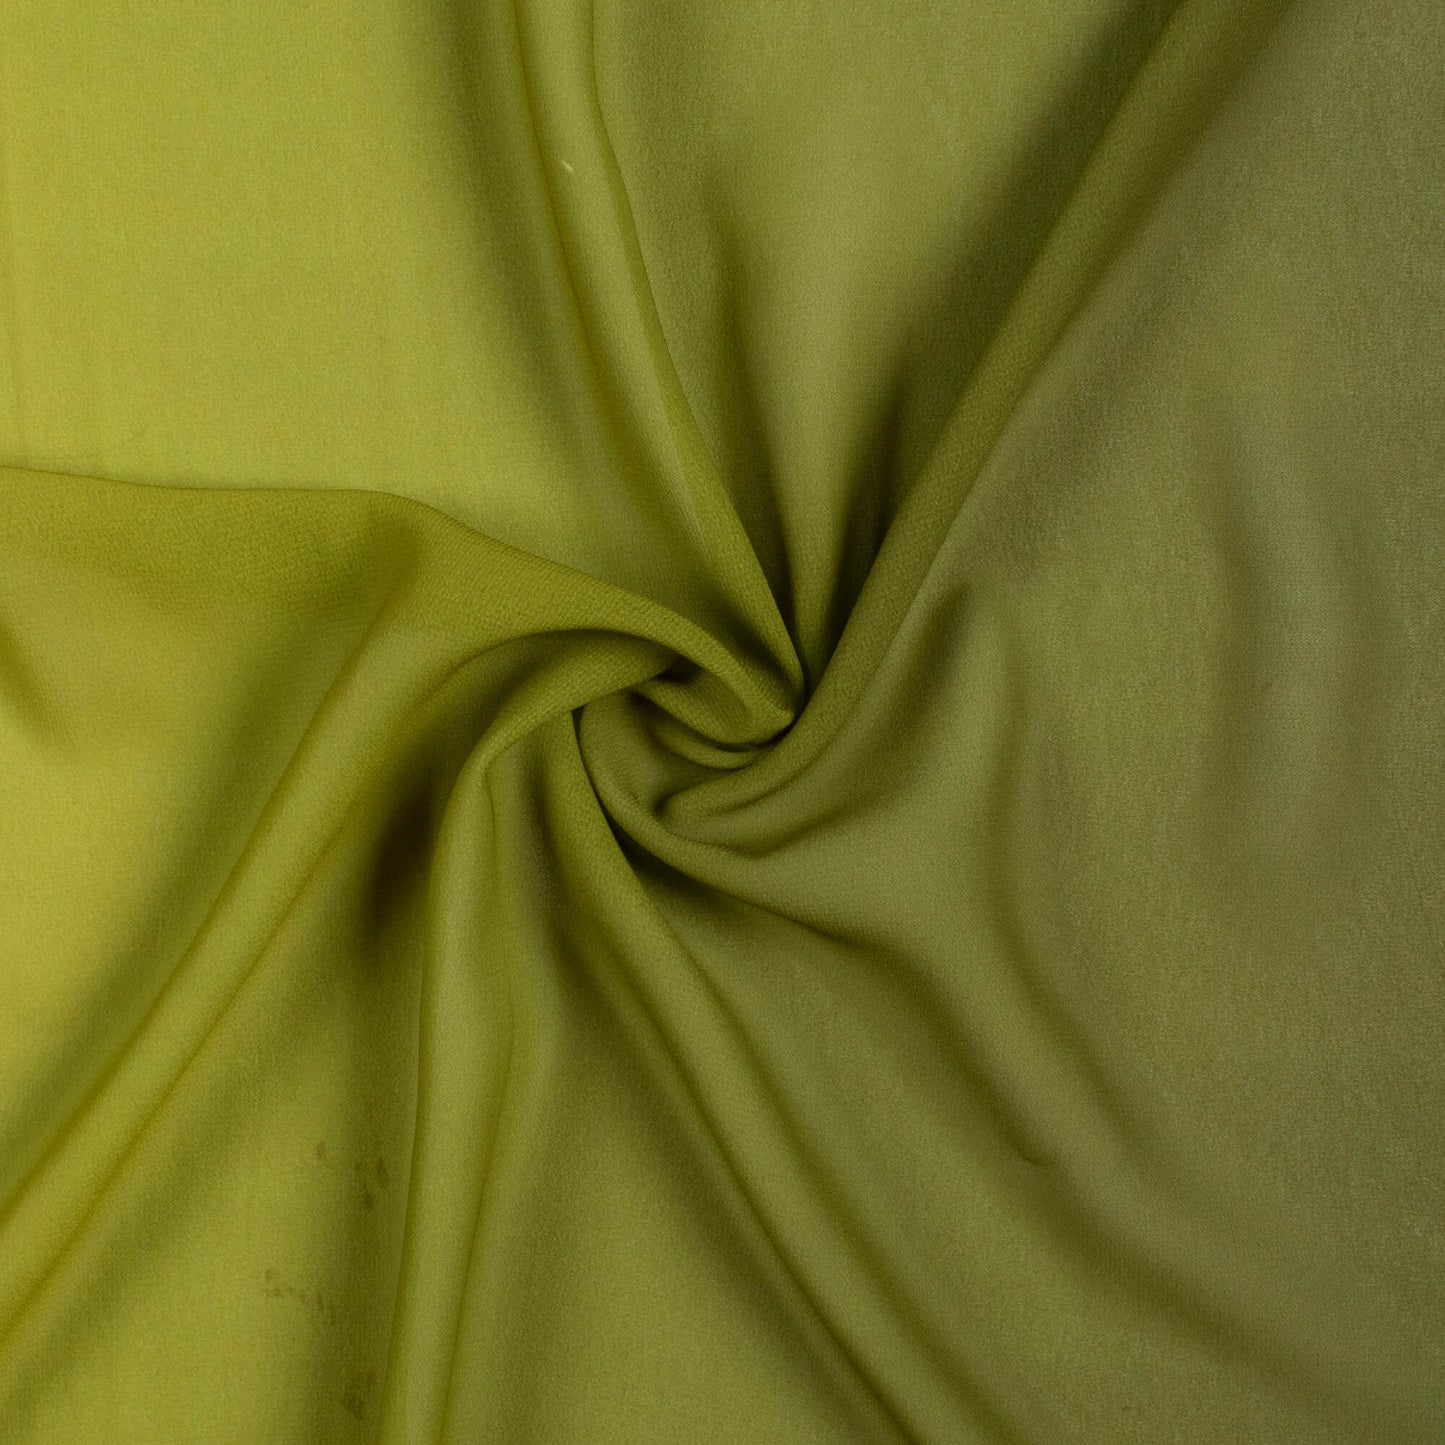 Olive Green And Lemon Yellow Ombre Pattern Digital Print Georgette Fabric